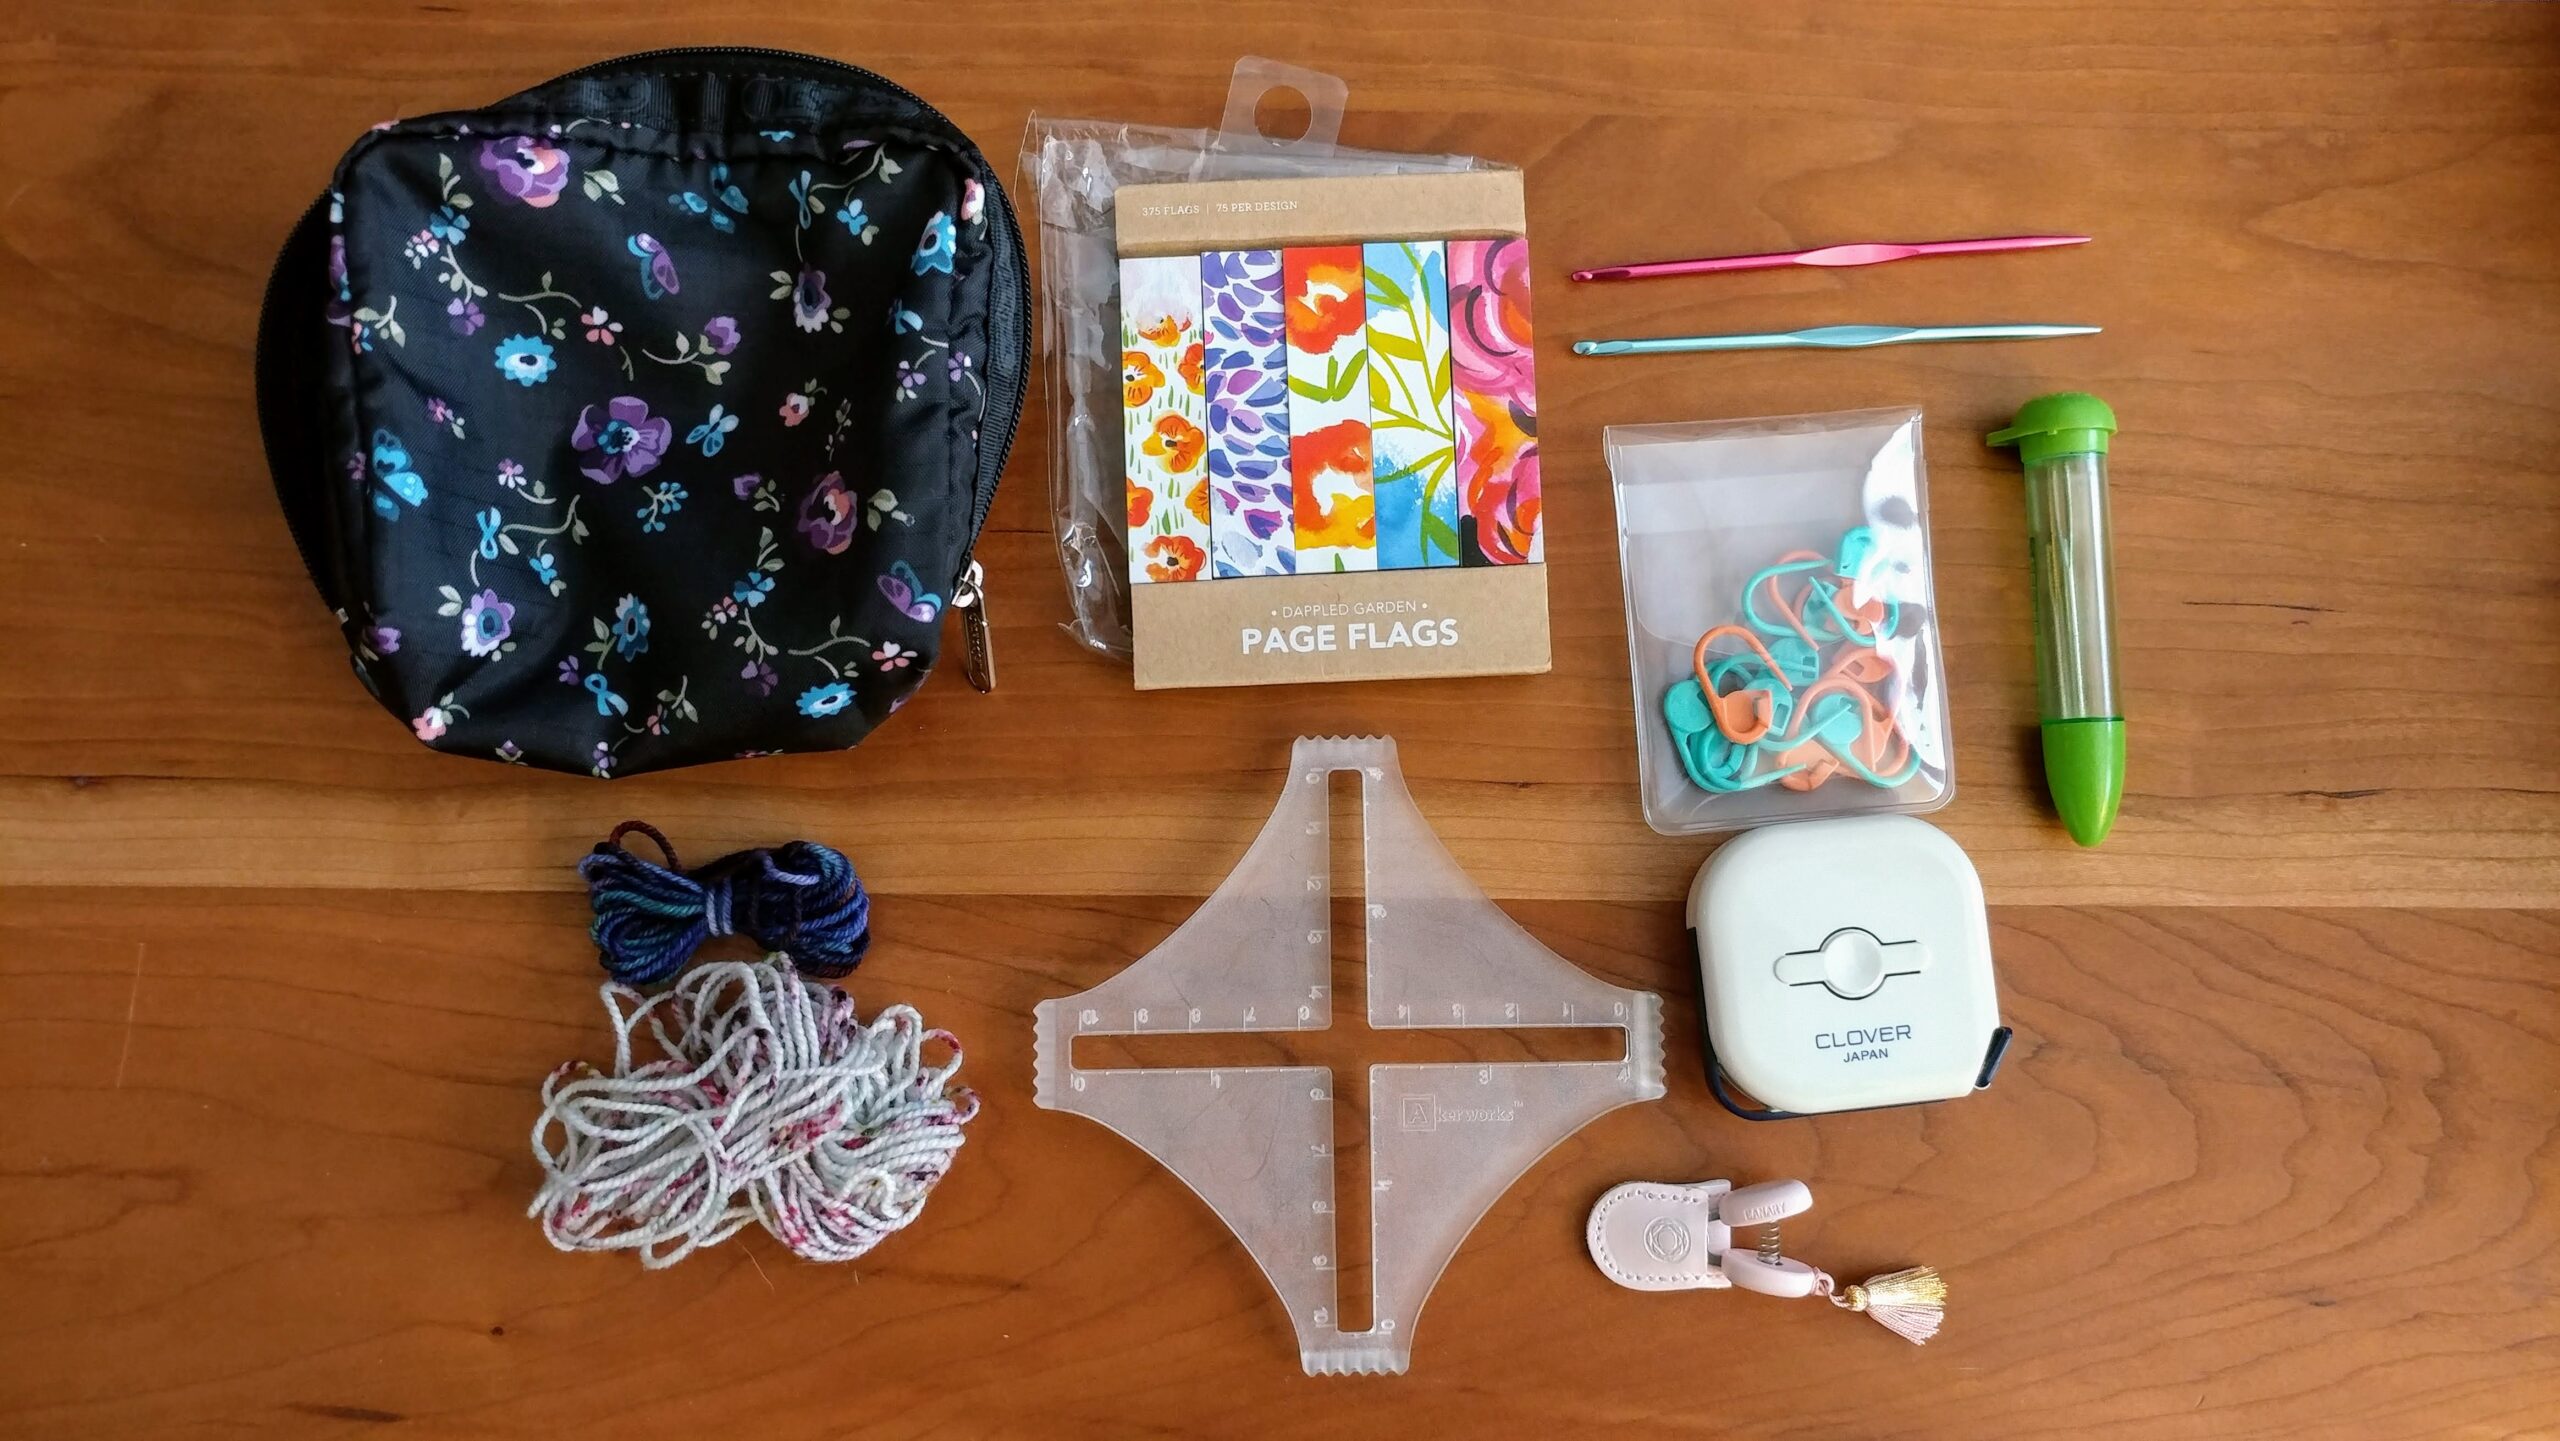 What's In My Notions Bag? My Favorite Knitting Tools - Knitting